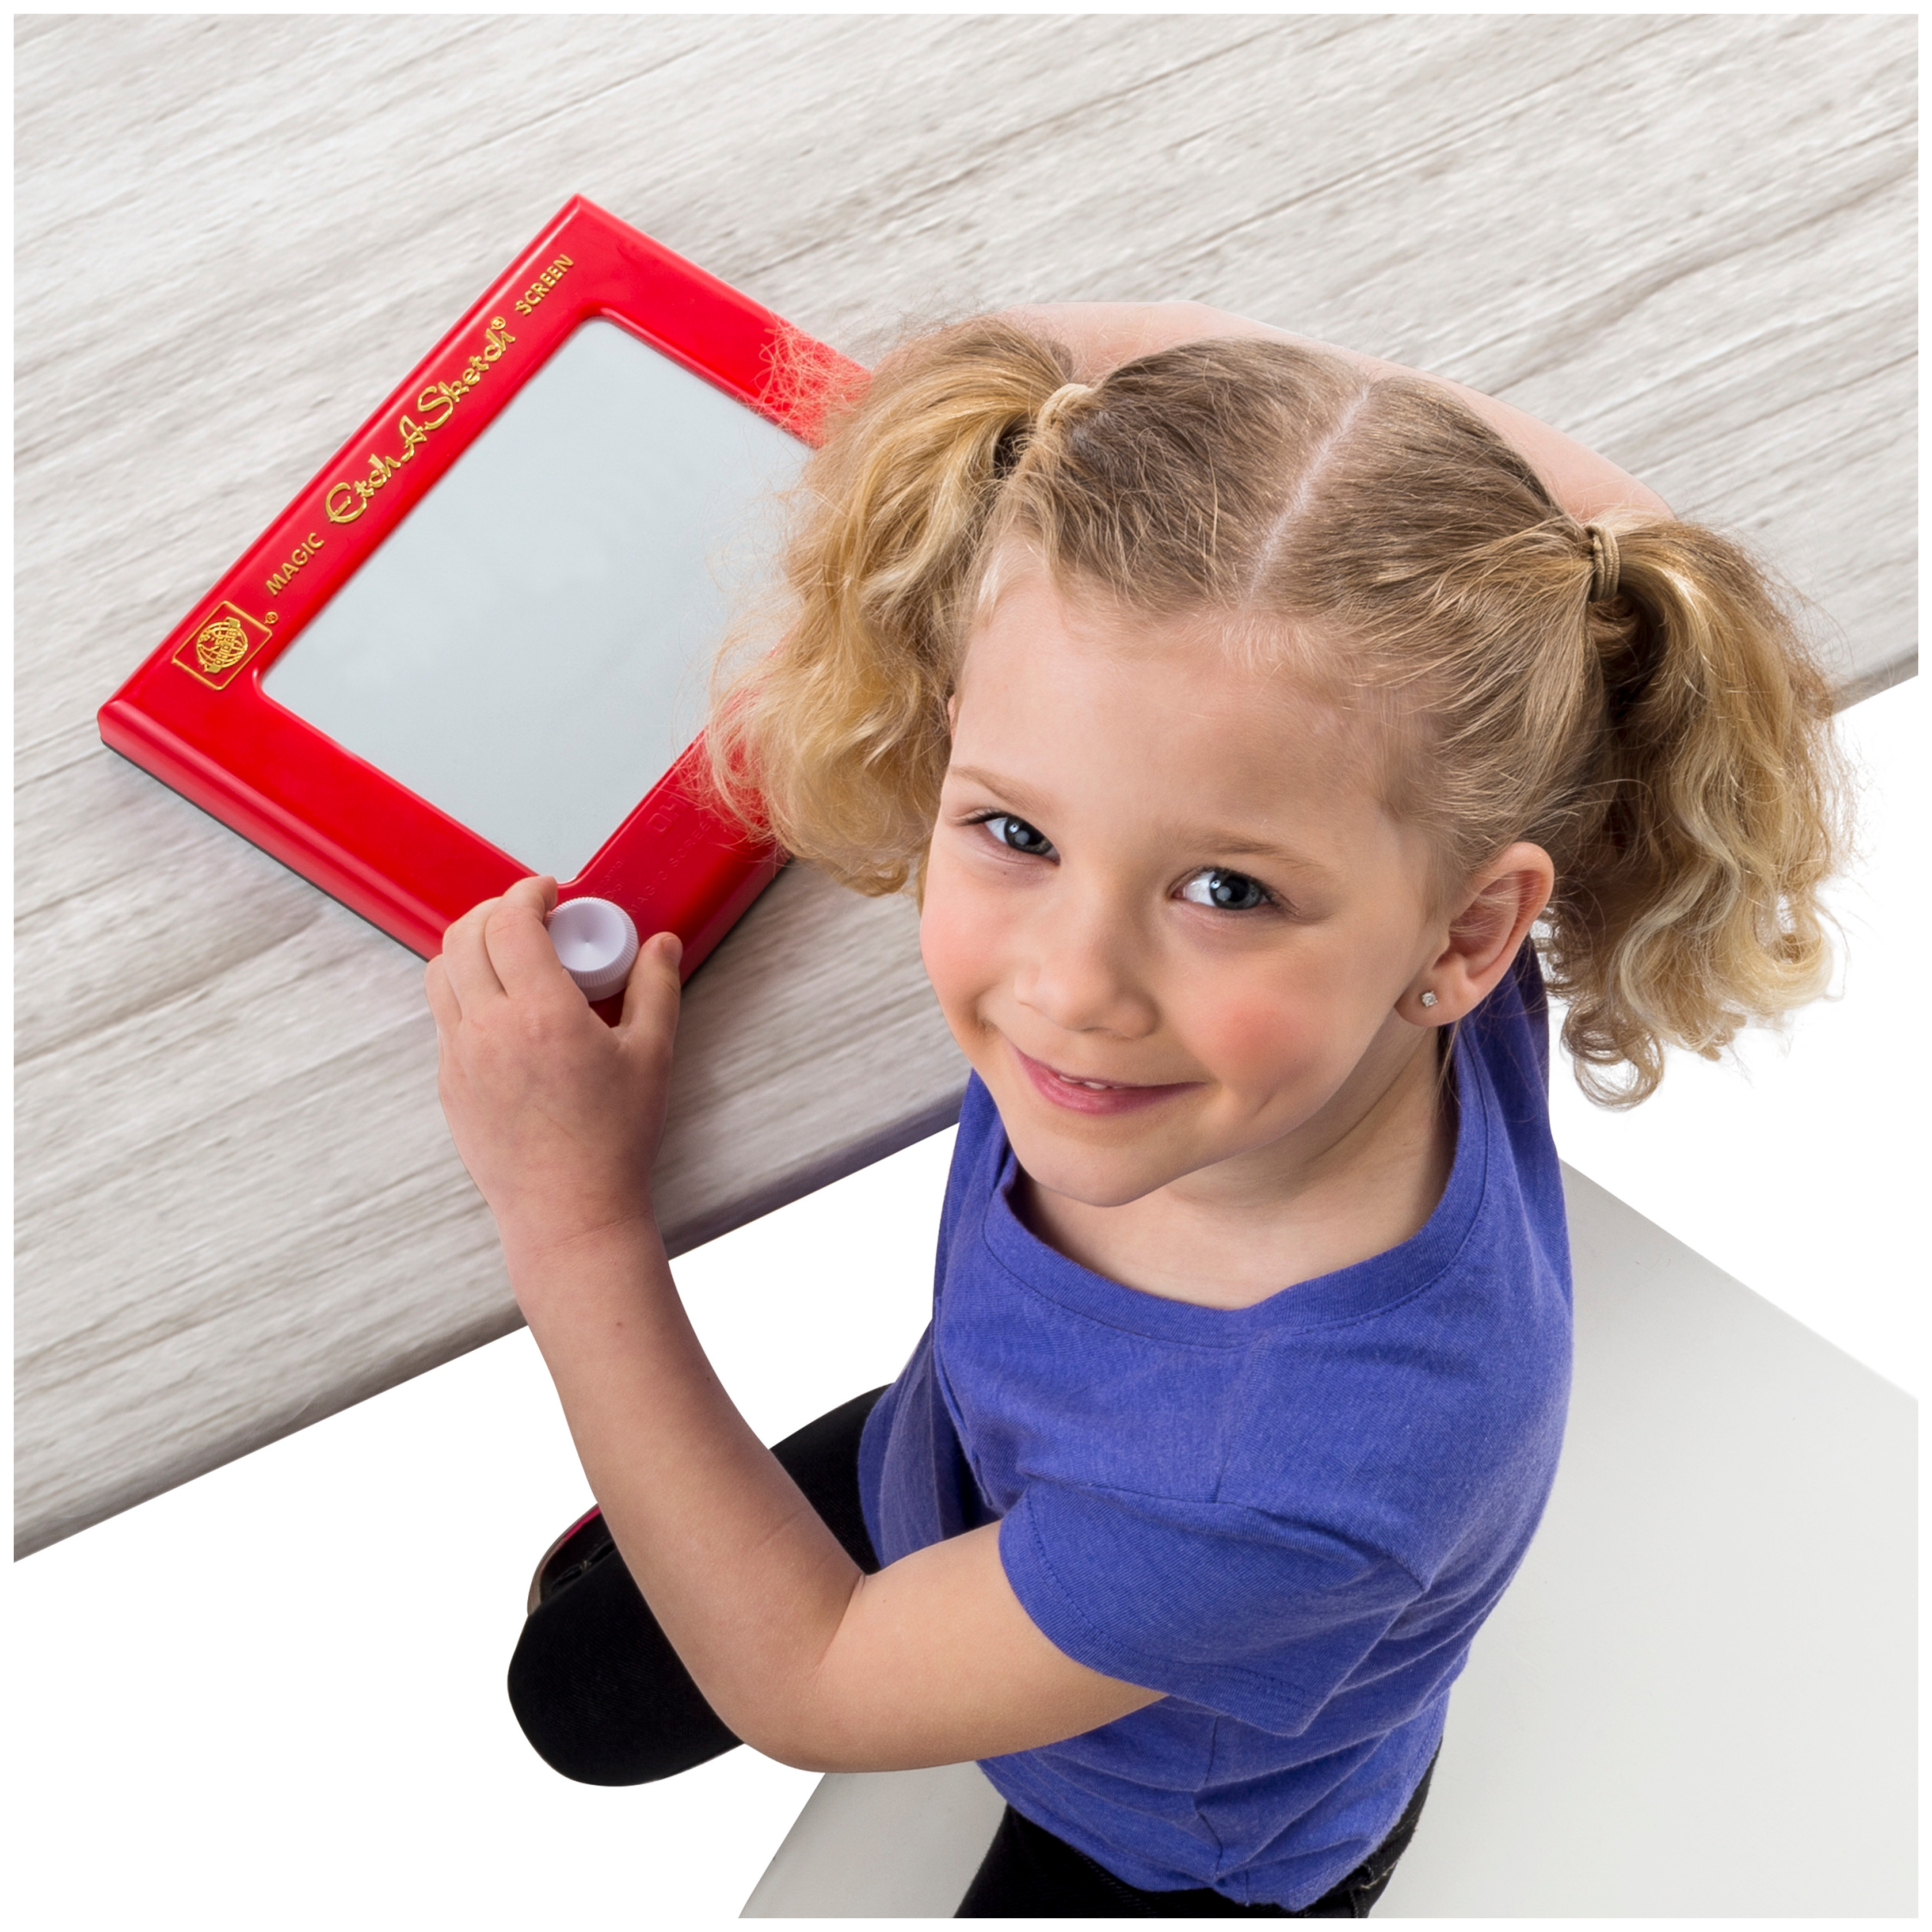 Etch A Sketch, Classic Red Drawing Toy with Magic Screen, for Ages 3 and Up - image 5 of 6